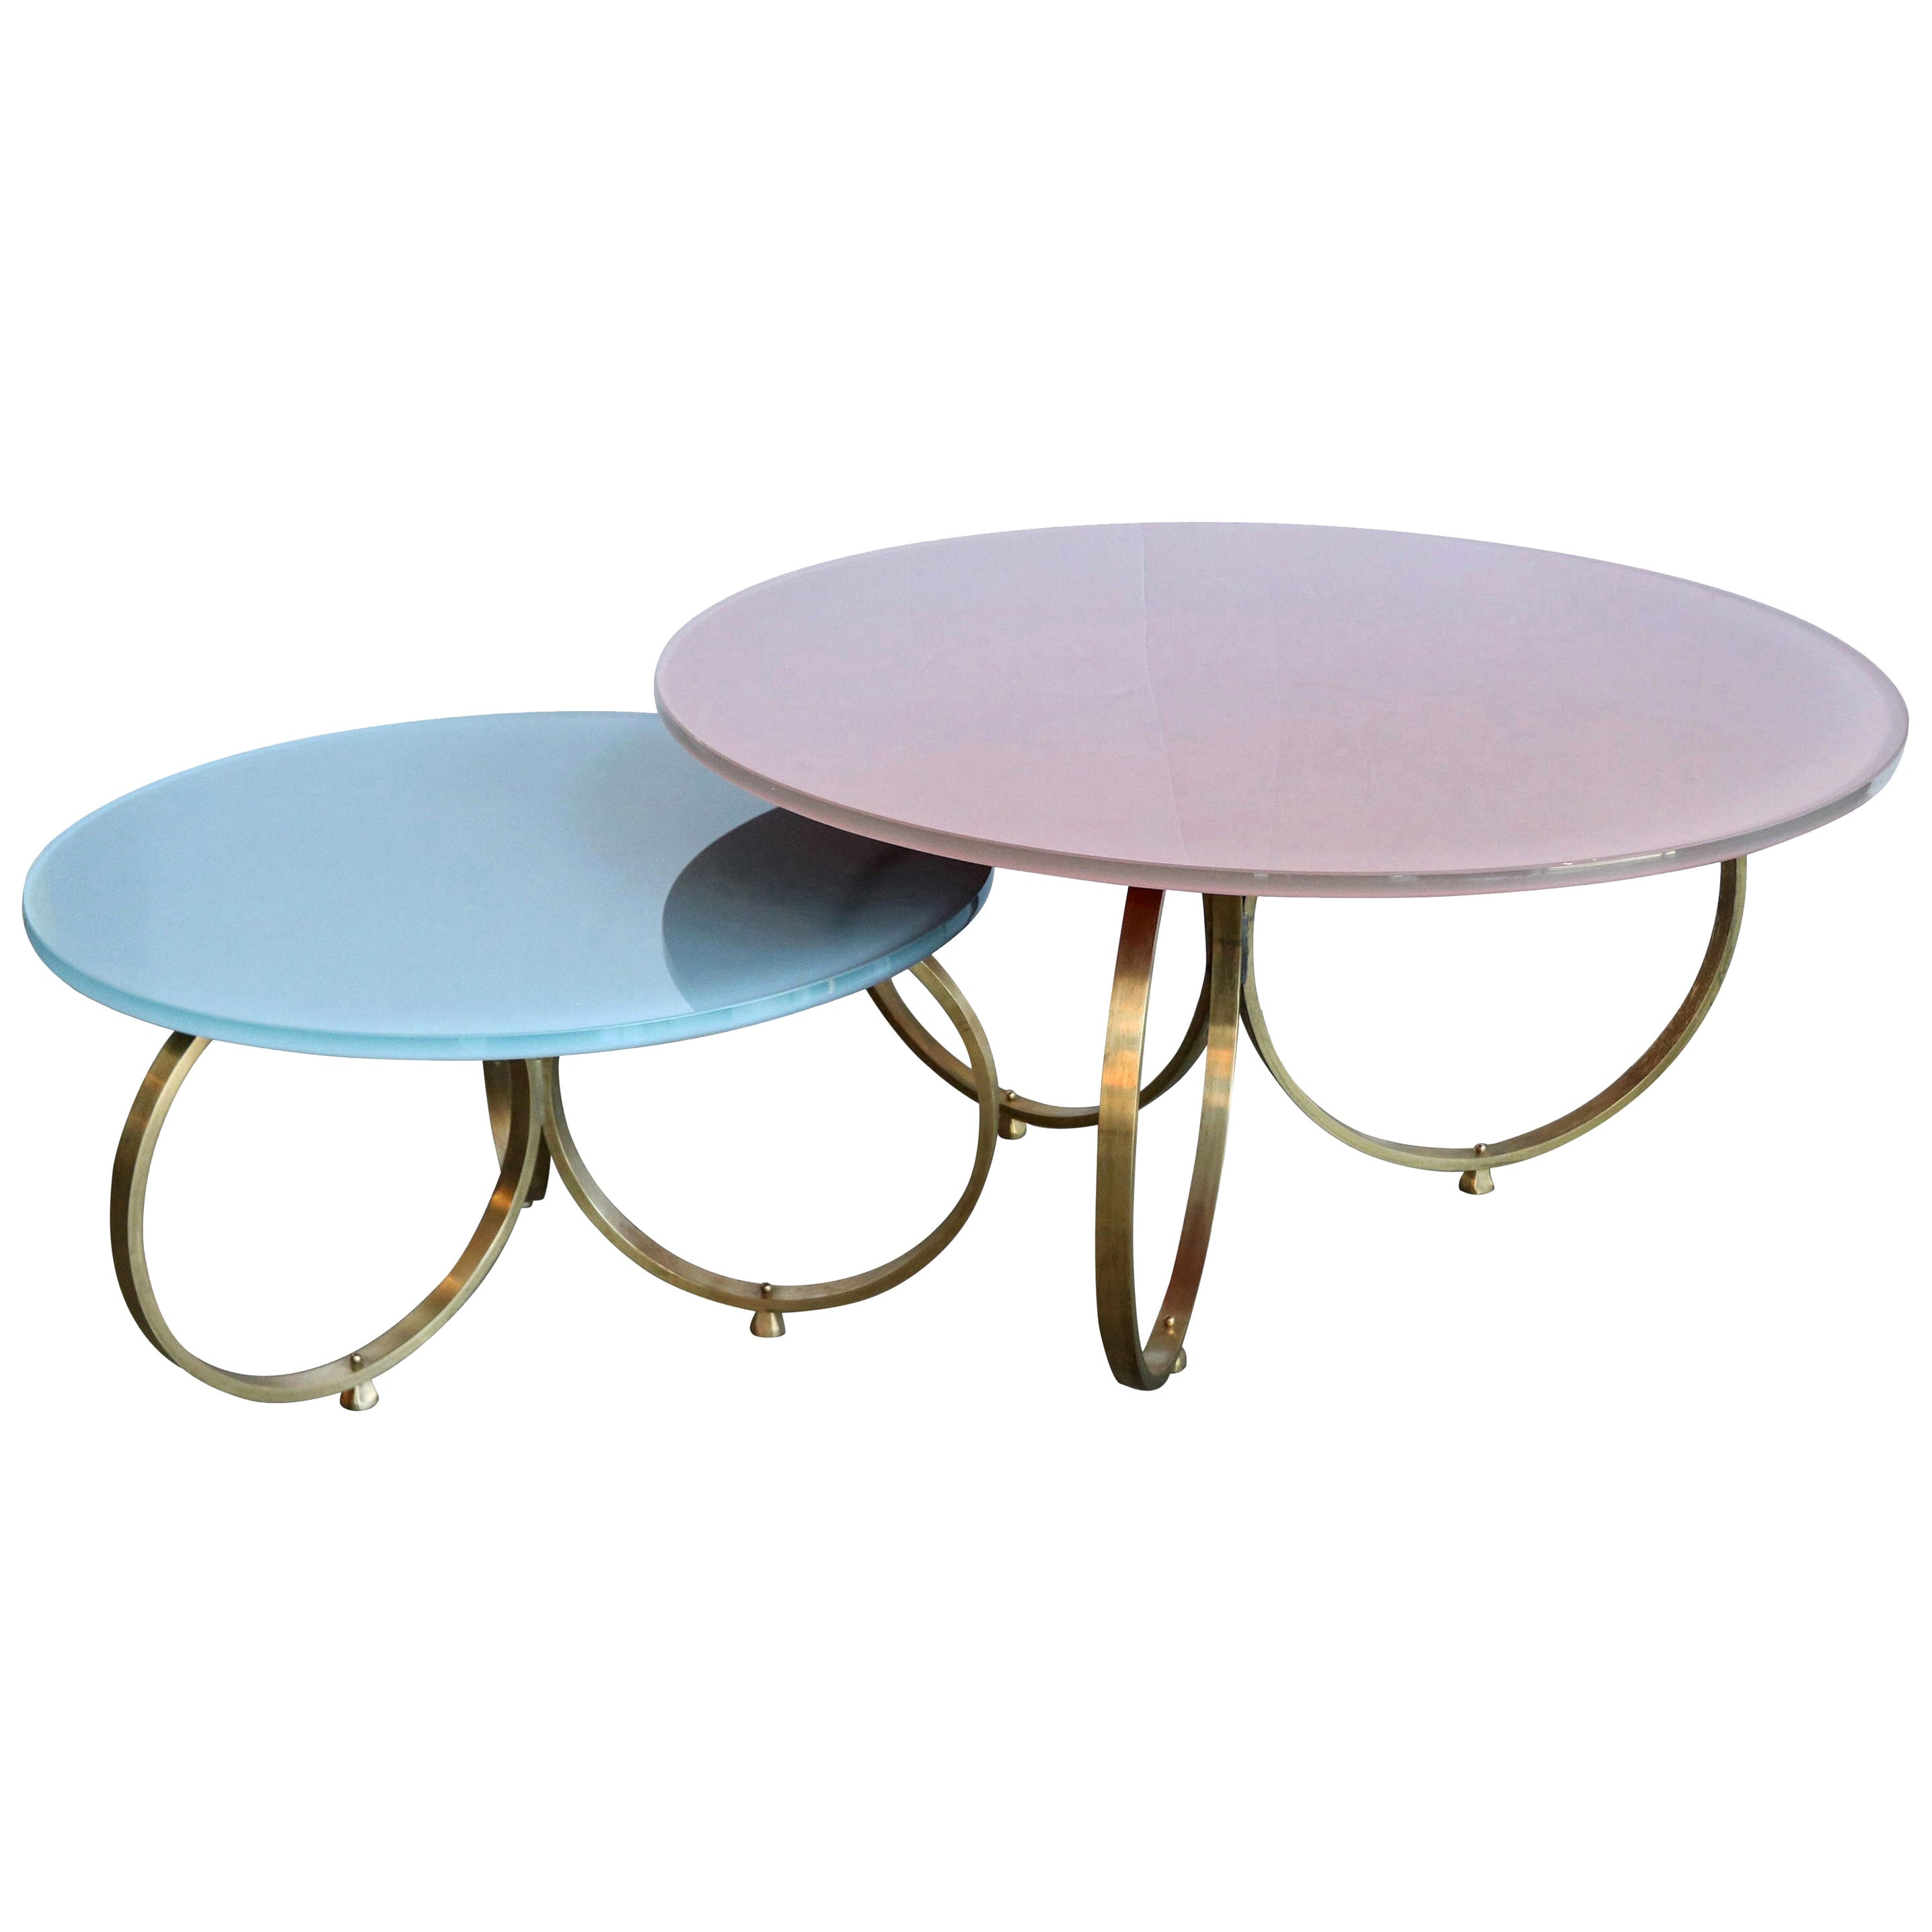 Two Custom Brass Coffee Tables with Reverse Painted Glass Top by Adesso Imports